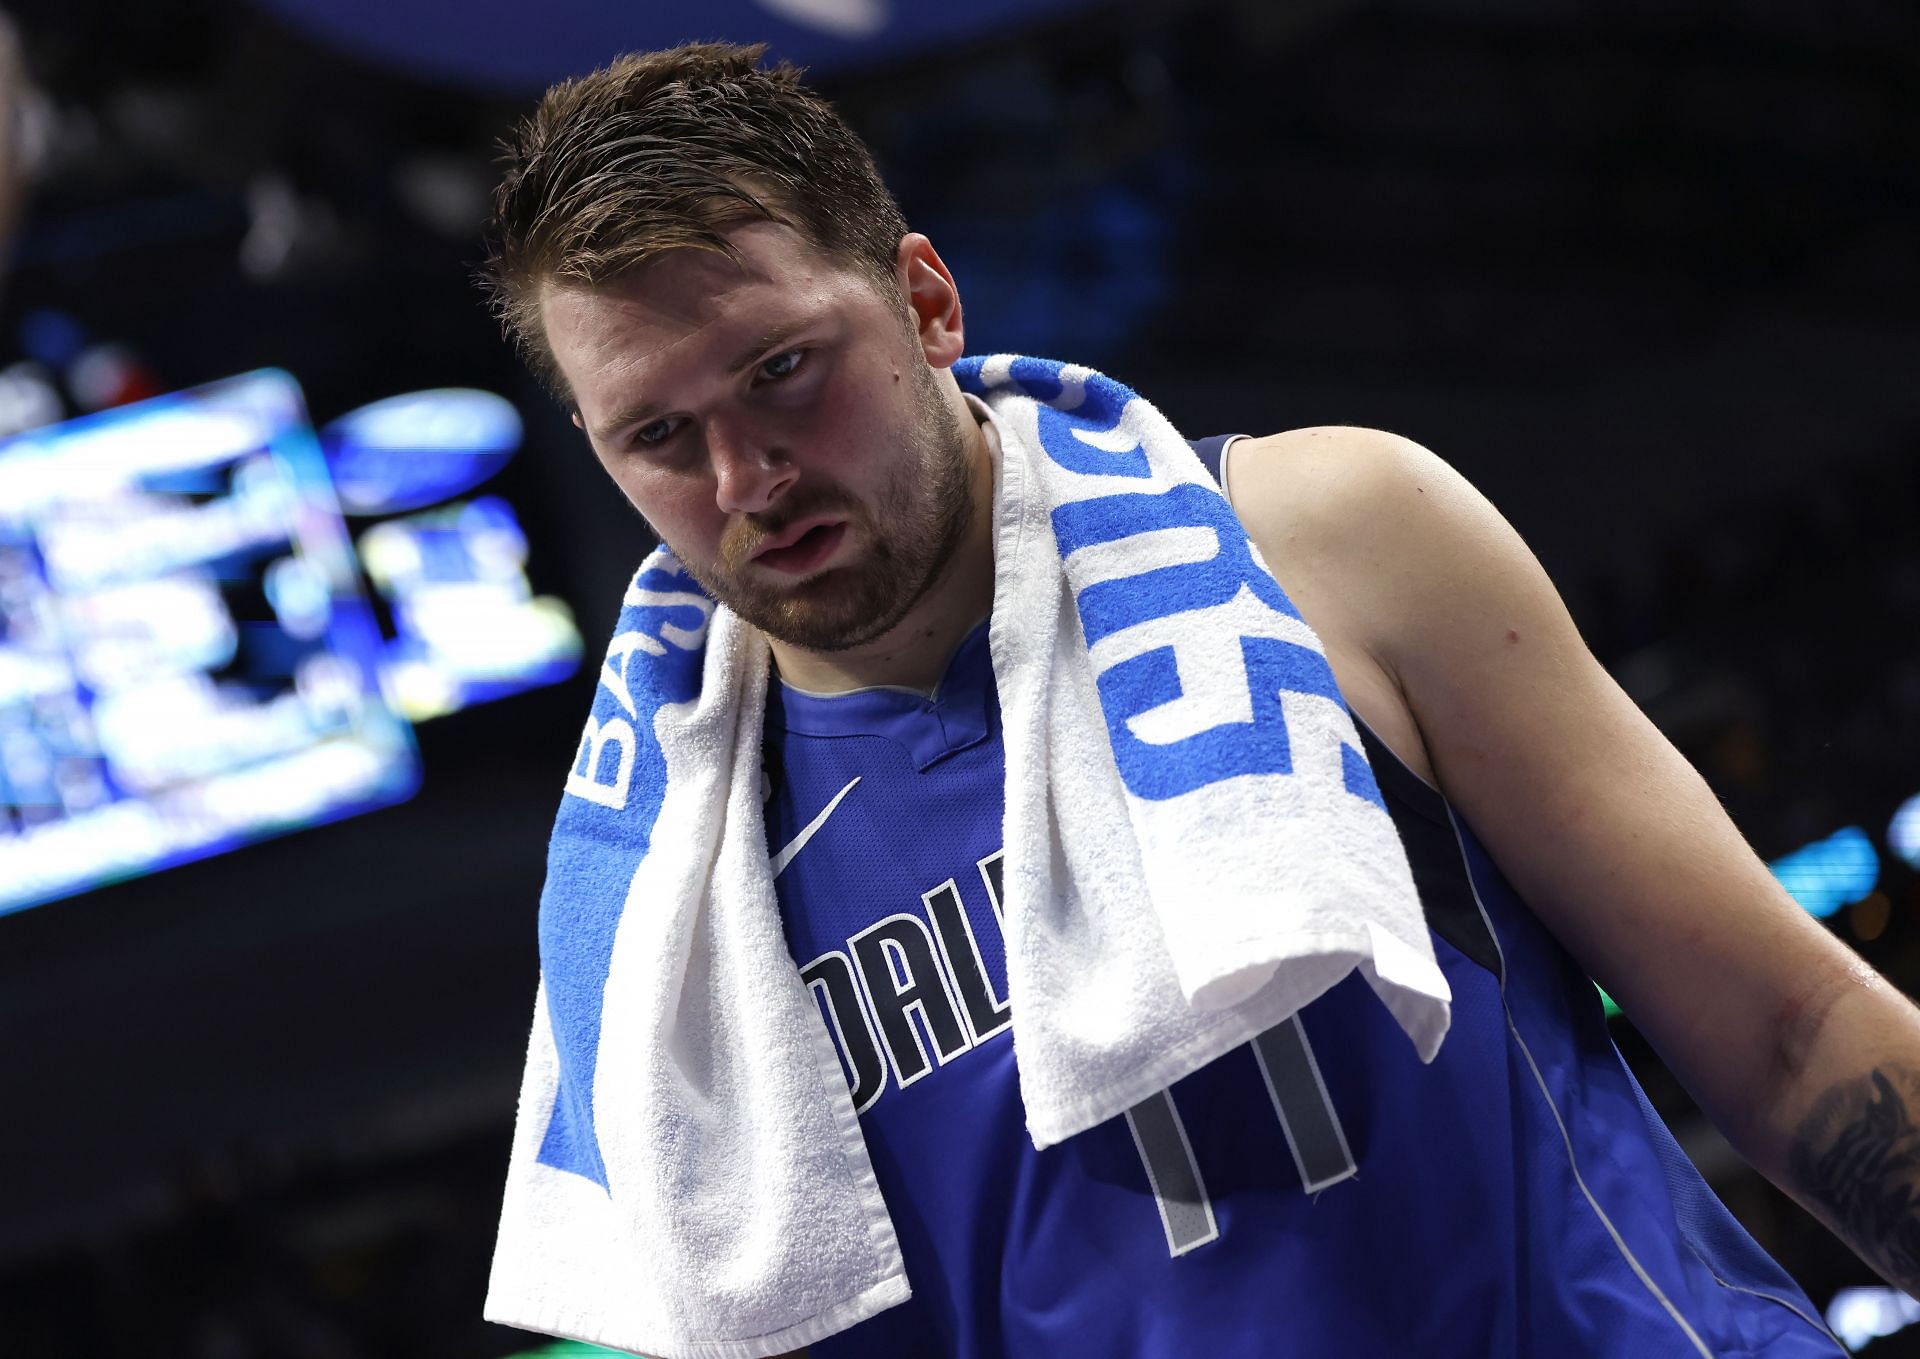 Luka Doncic gives jersey to fan he fell on, NBA News